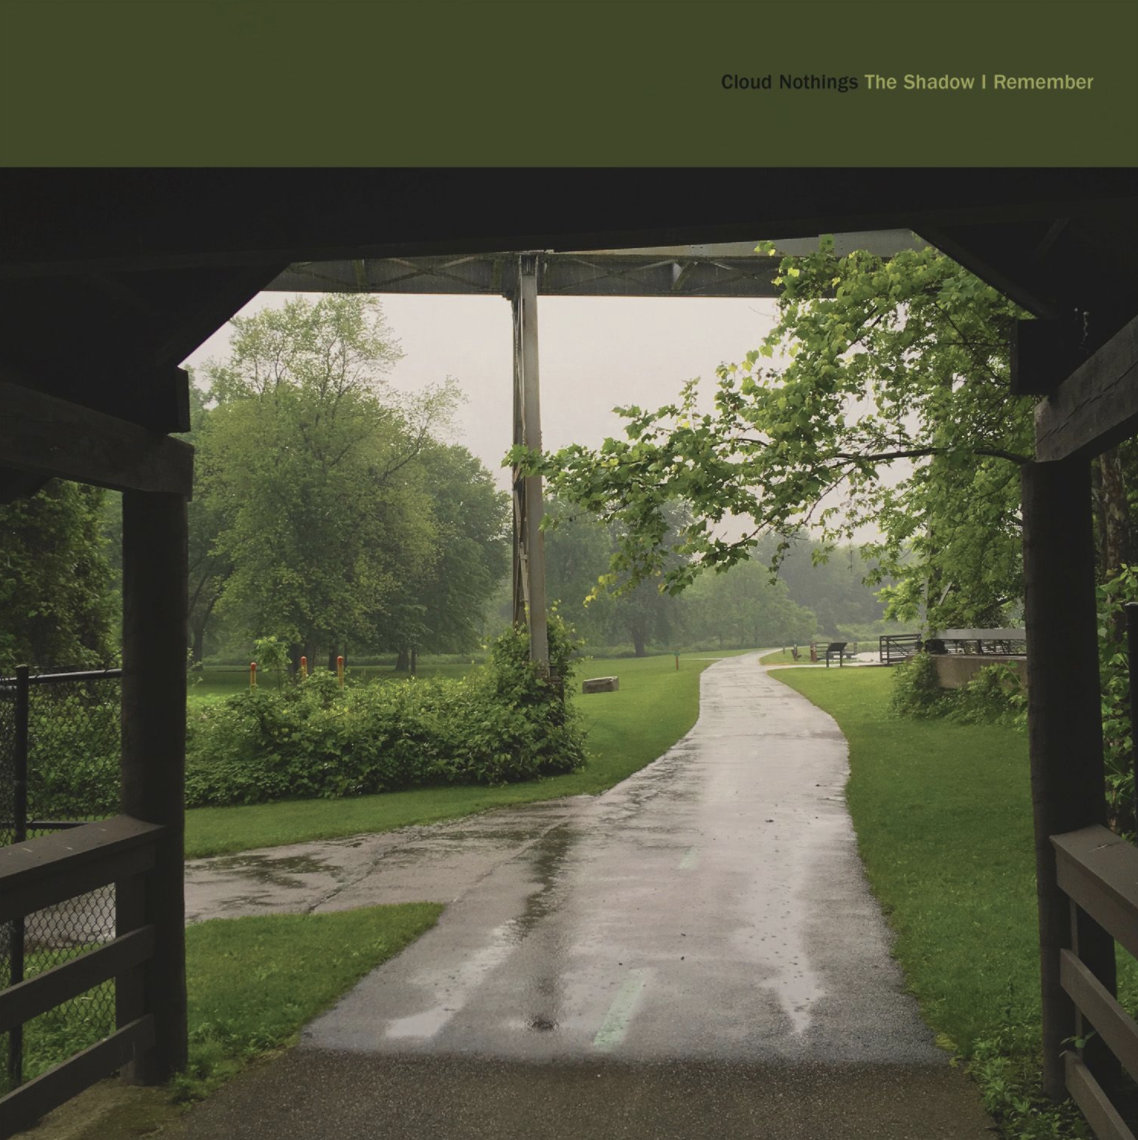 Cloud Nothings Announce New Album <i>
<p><em><strong>The Shadow I Remember </strong></em><strong>tracklist</strong></p>
<p>1. Oslo</p>
<p>2. Nothing Without You</p>
<p>3. The Spirit Of</p>
<p>4. Only Light</p>
<p>5. Nara</p>
<p>6. Open Rain</p>
<p>7. Sound Of Alarm</p>
<p>8. Am I Something</p>
<p>9. It’s Love</p>
<p>10. A Longer Moon</p>
<p>11. The Room It Was</p>
</p><p>To see our running list of the top 100 greatest rock stars of all time, <a href=